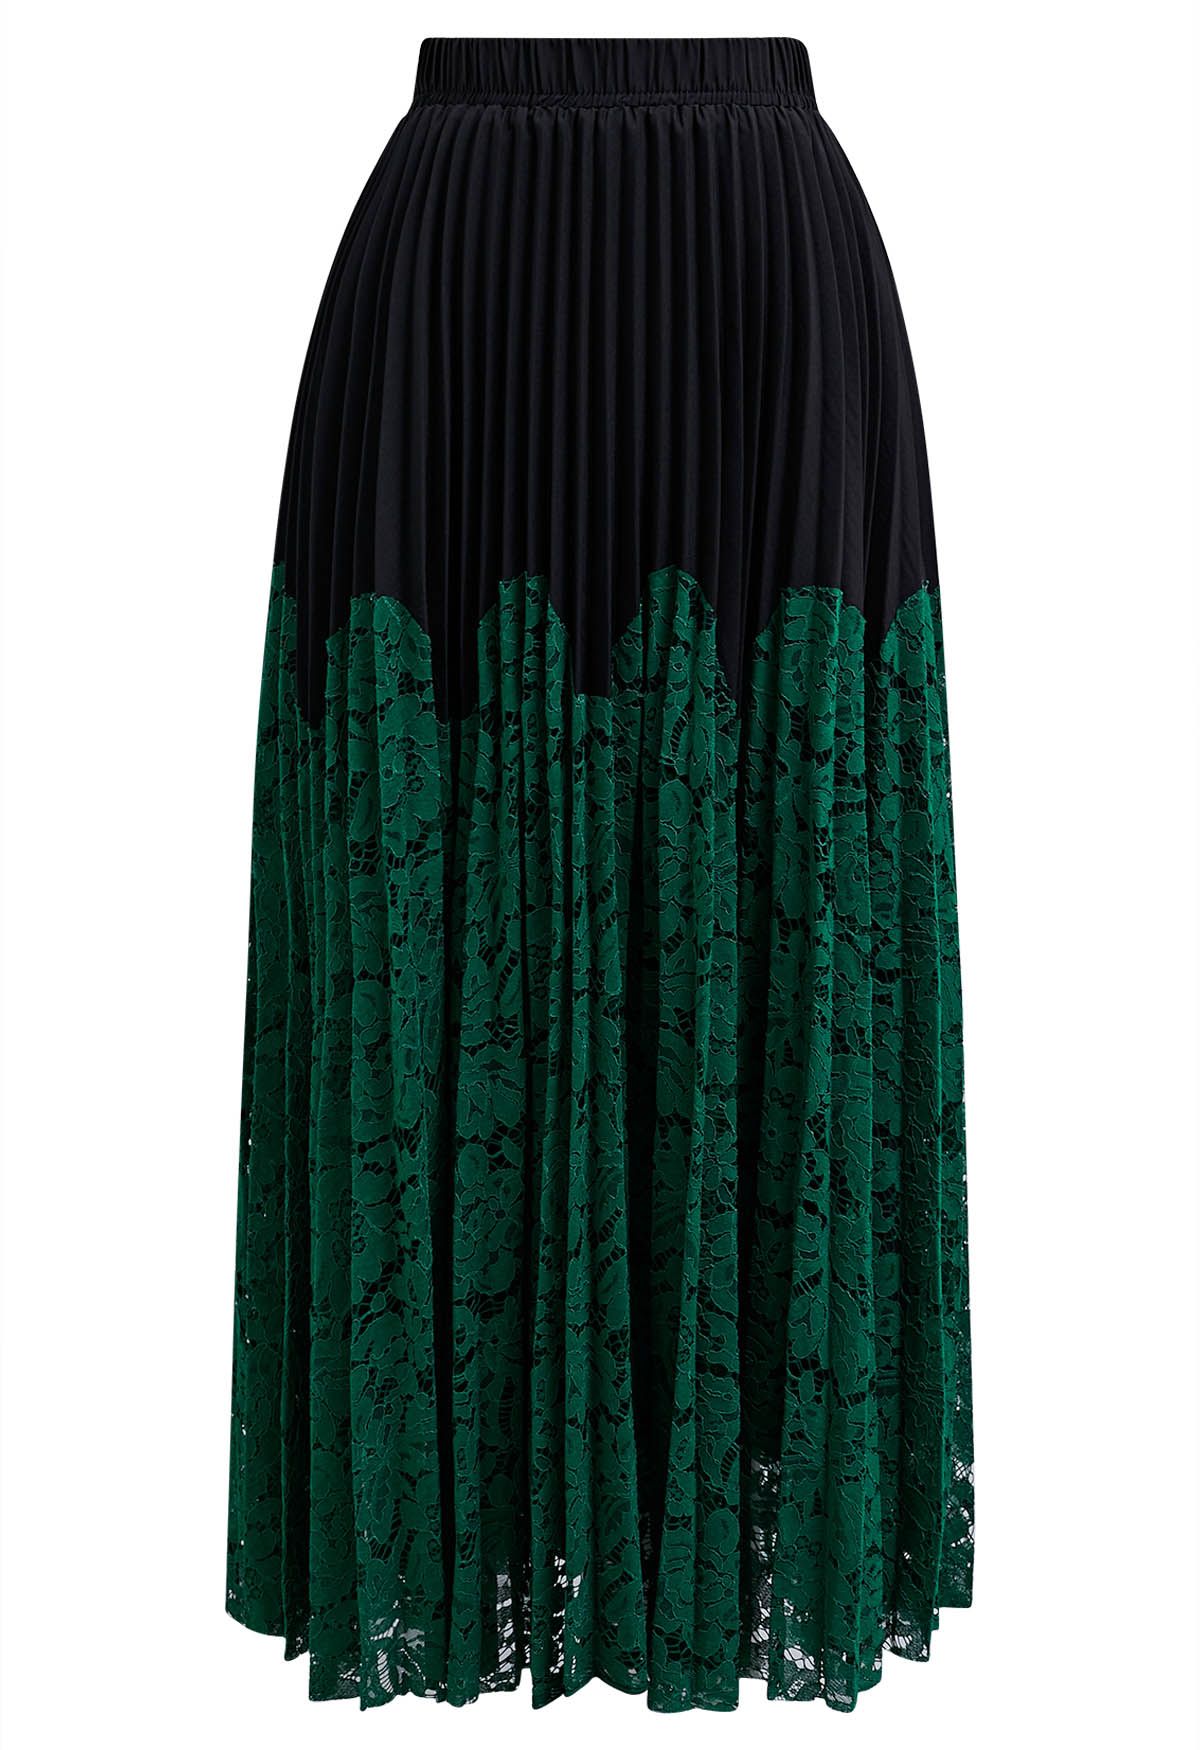 Floral Lace Spliced Pleated Maxi Skirt in Dark Green